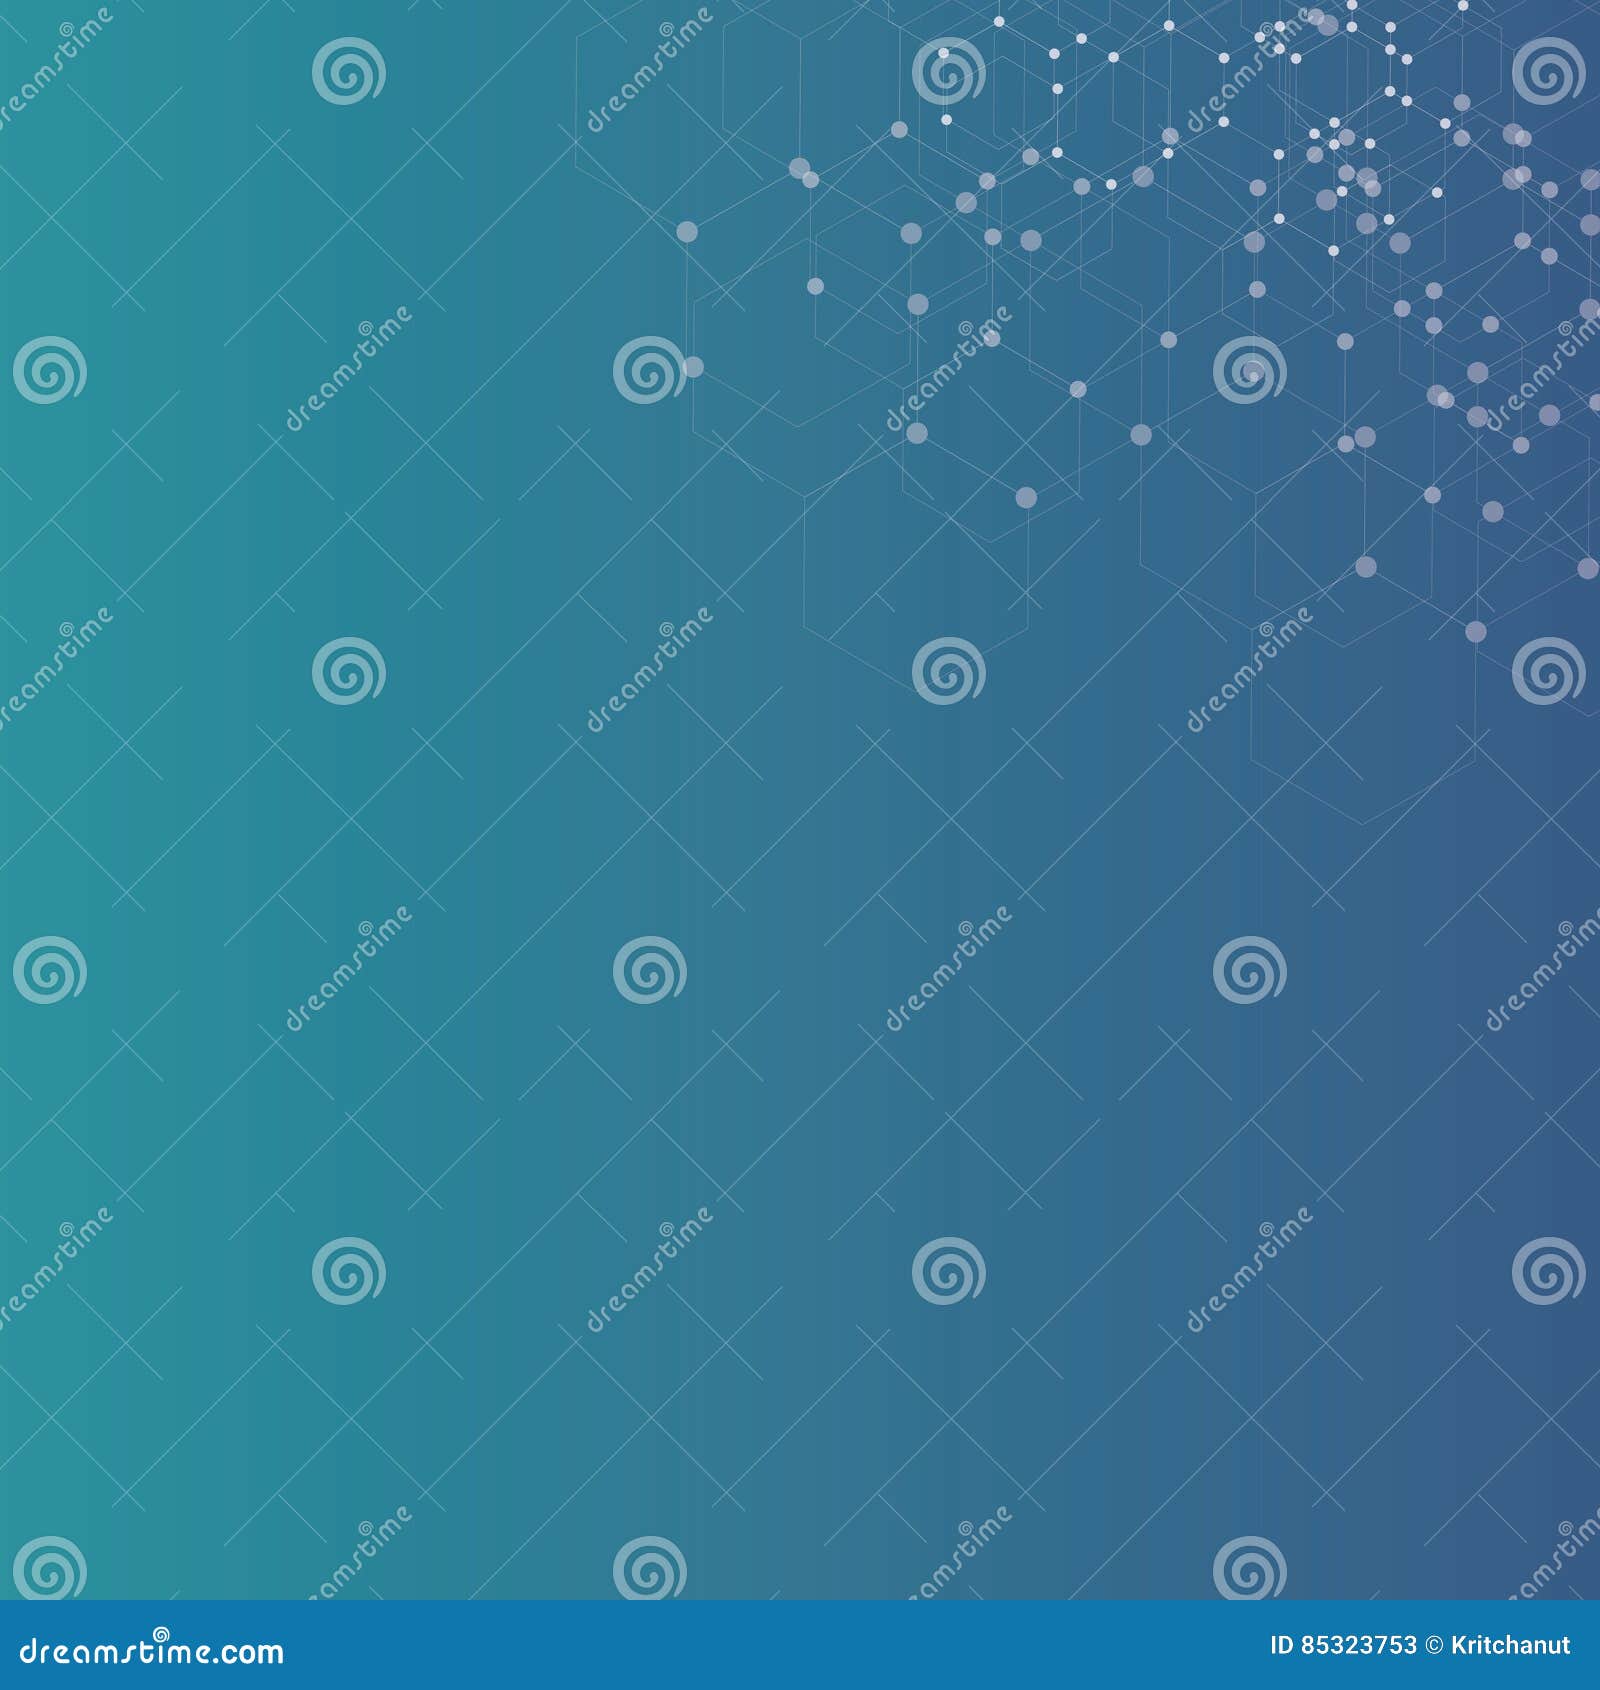 Blue Turquoise Gradient Abstract Background with Molecular Pattern ...